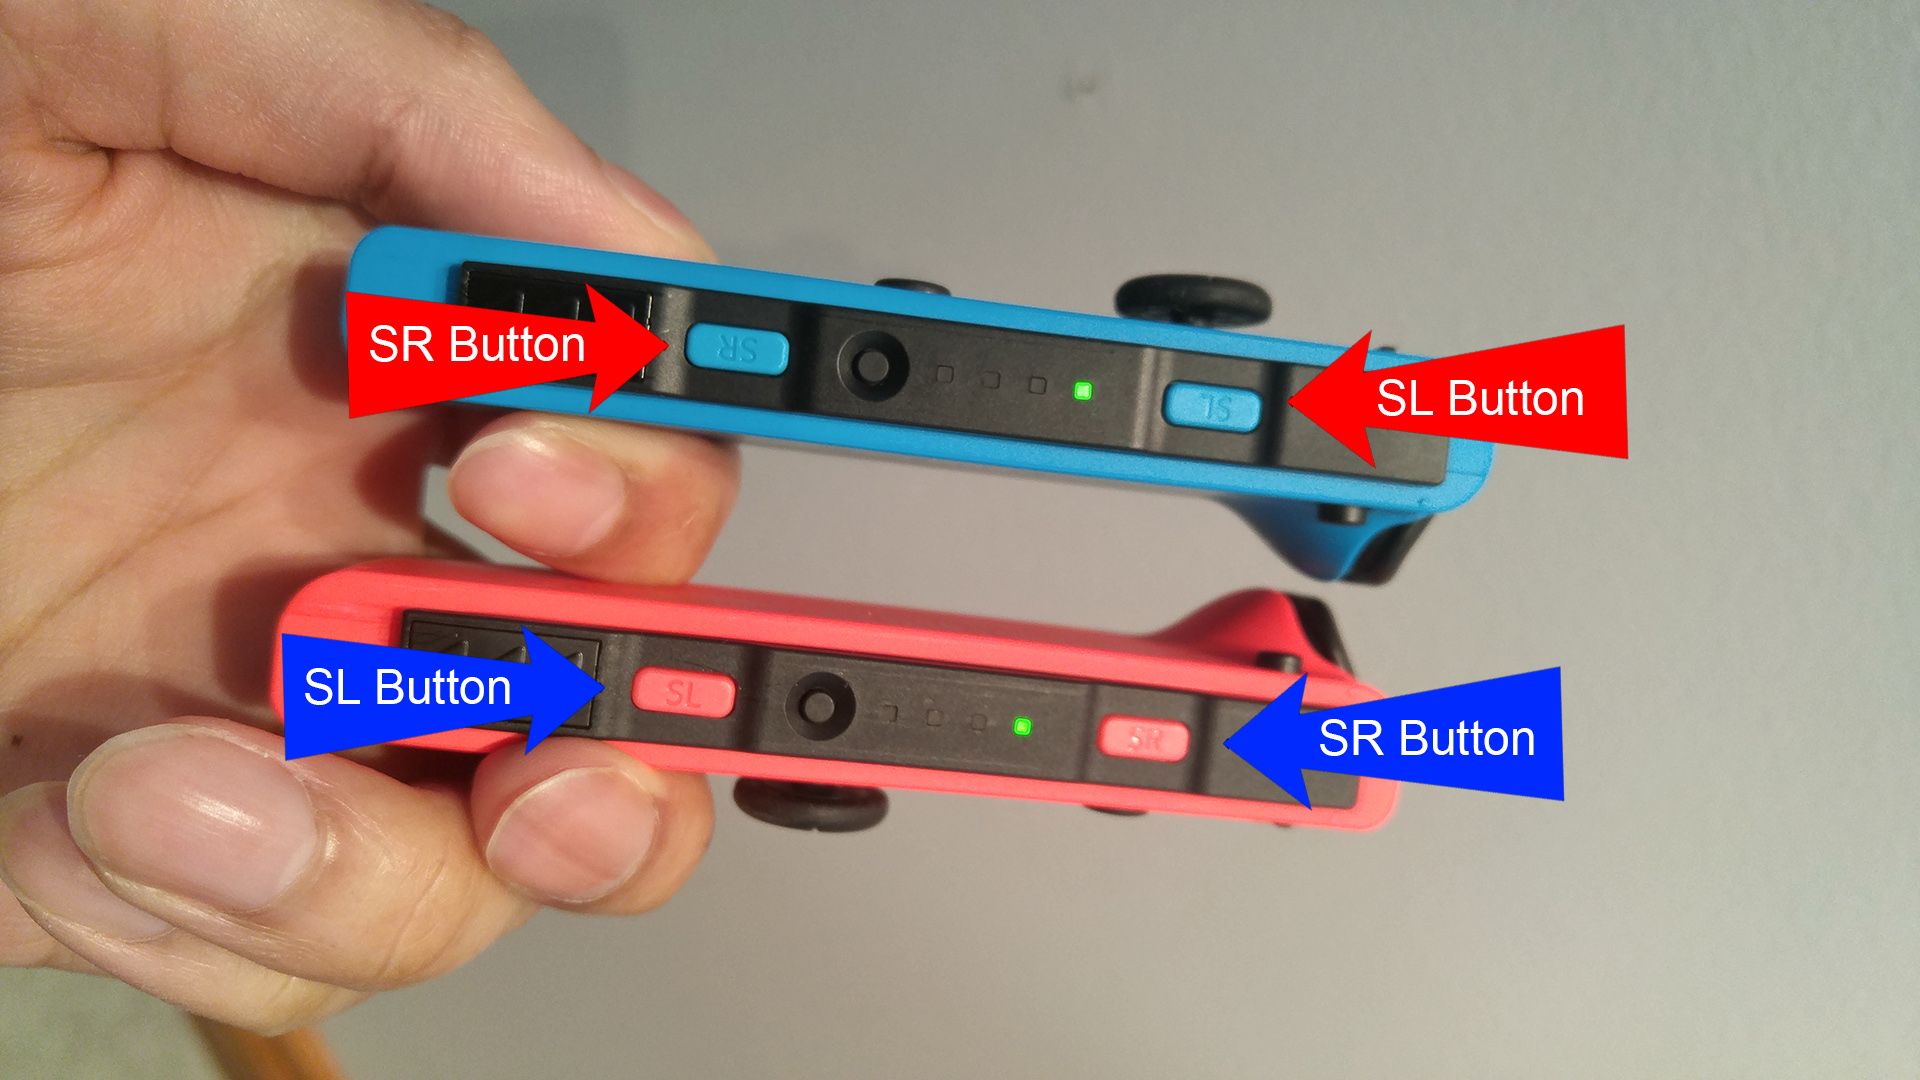 Red and blue arrows pointing at SL and SR buttons on two Joy-Cons.